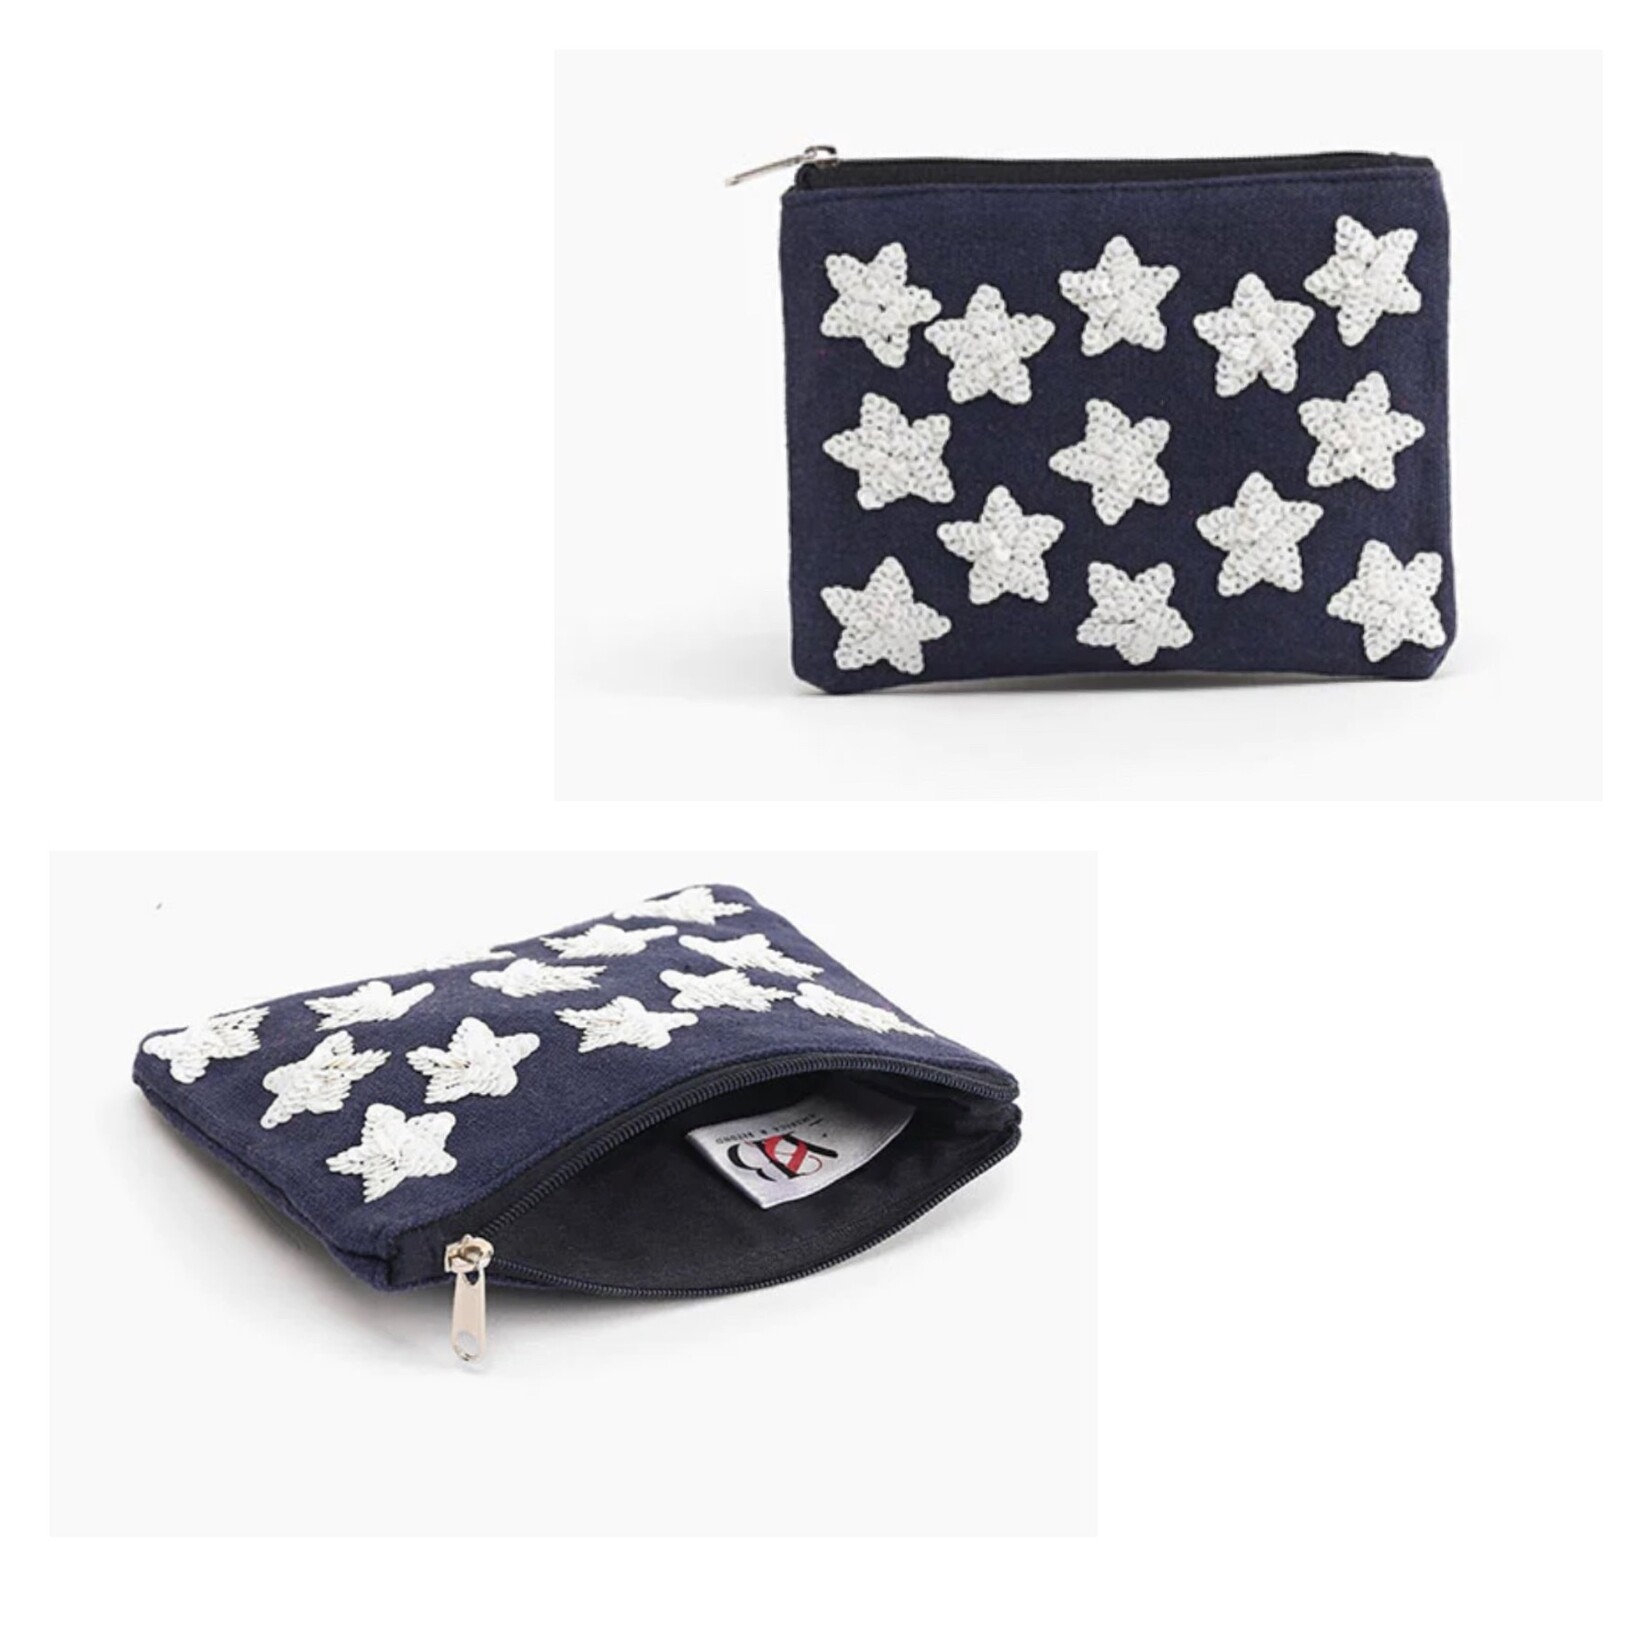 American & Beyond A&B Embellished Coin Bag